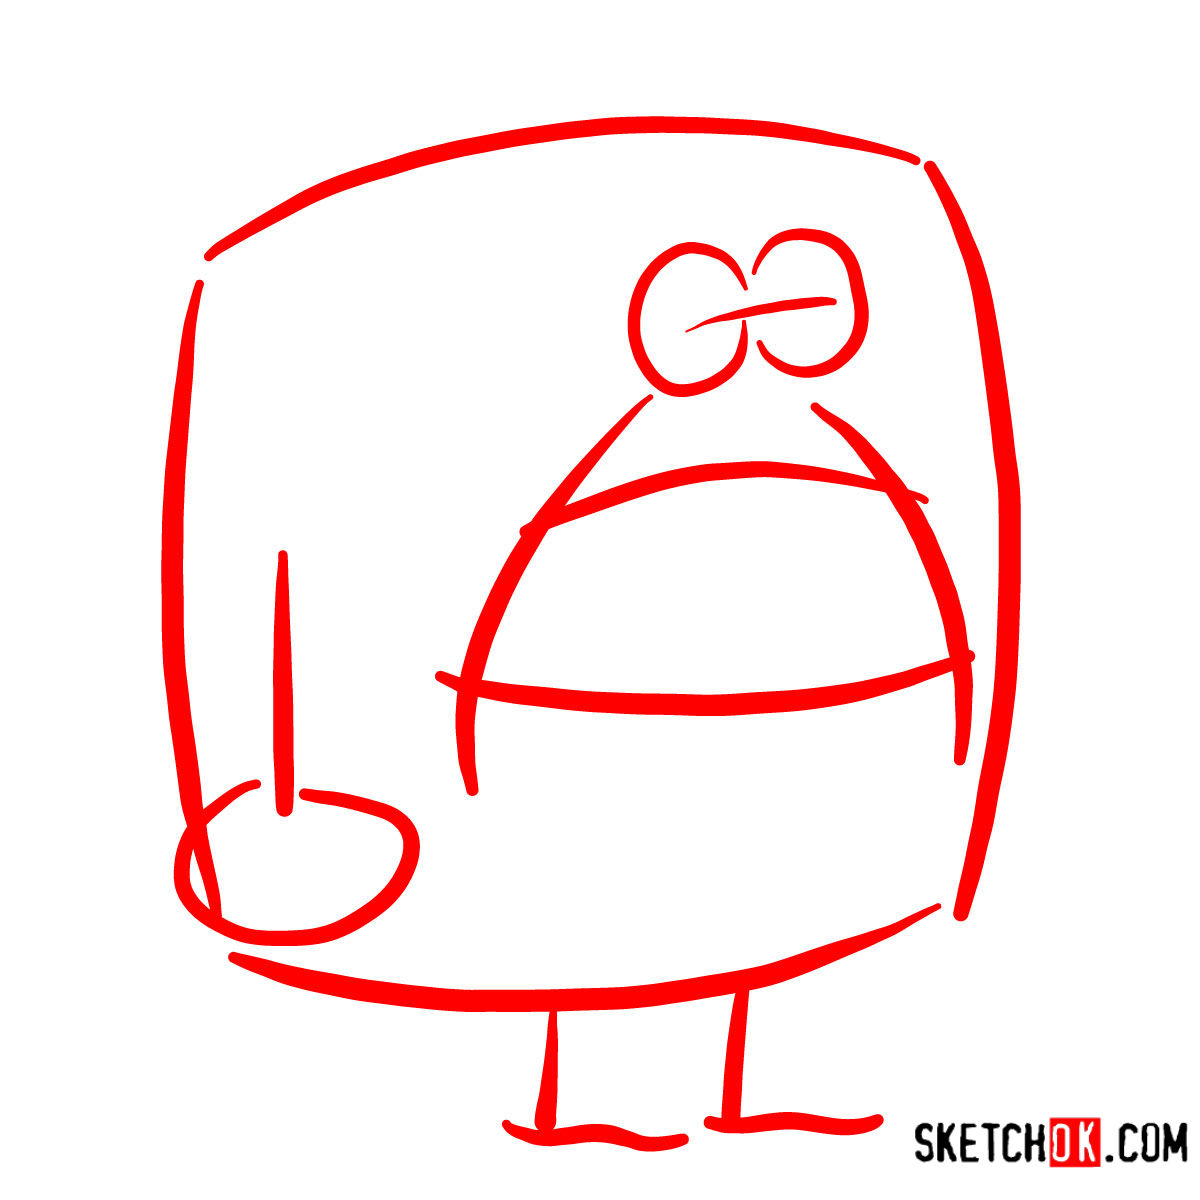 How to draw Chestnut from Chowder - step 01